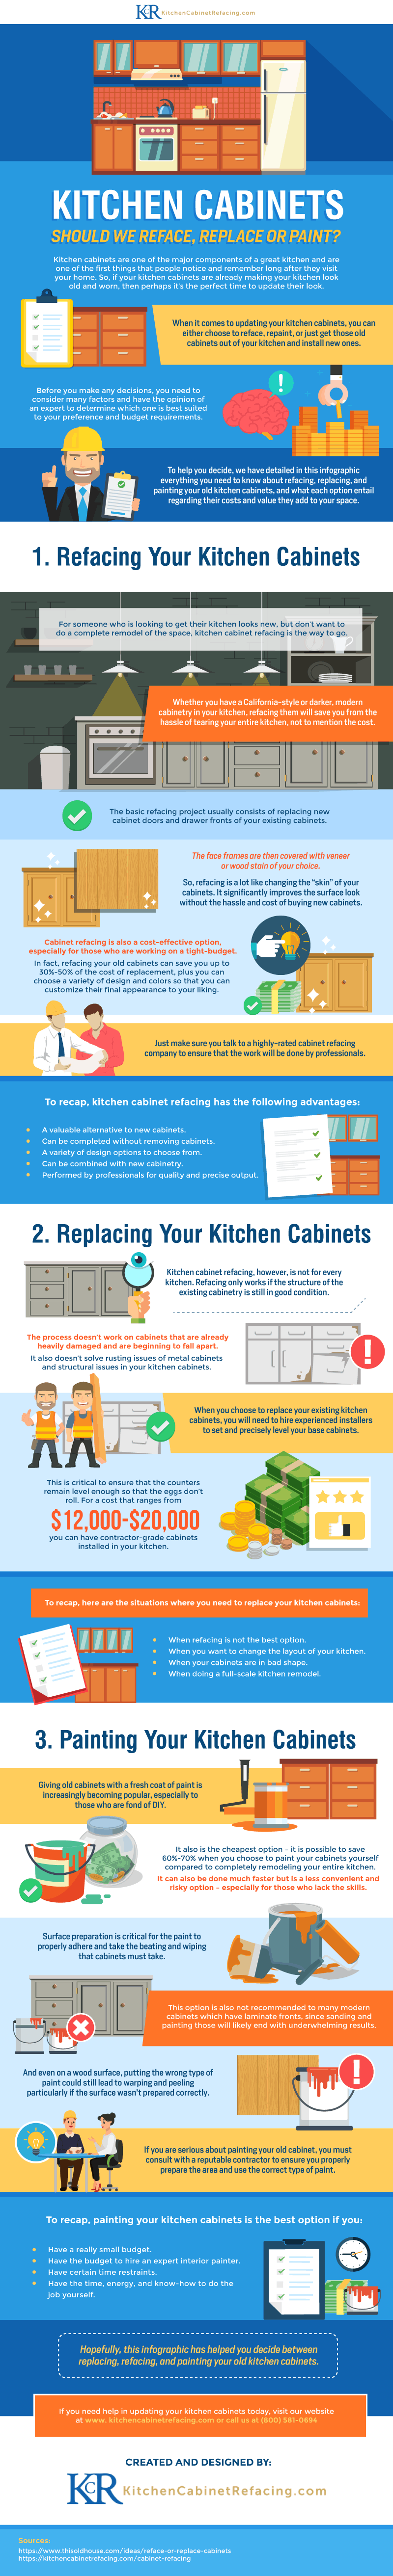 Kitchen Cabinets Should We Reface Replace or Paint Infographic